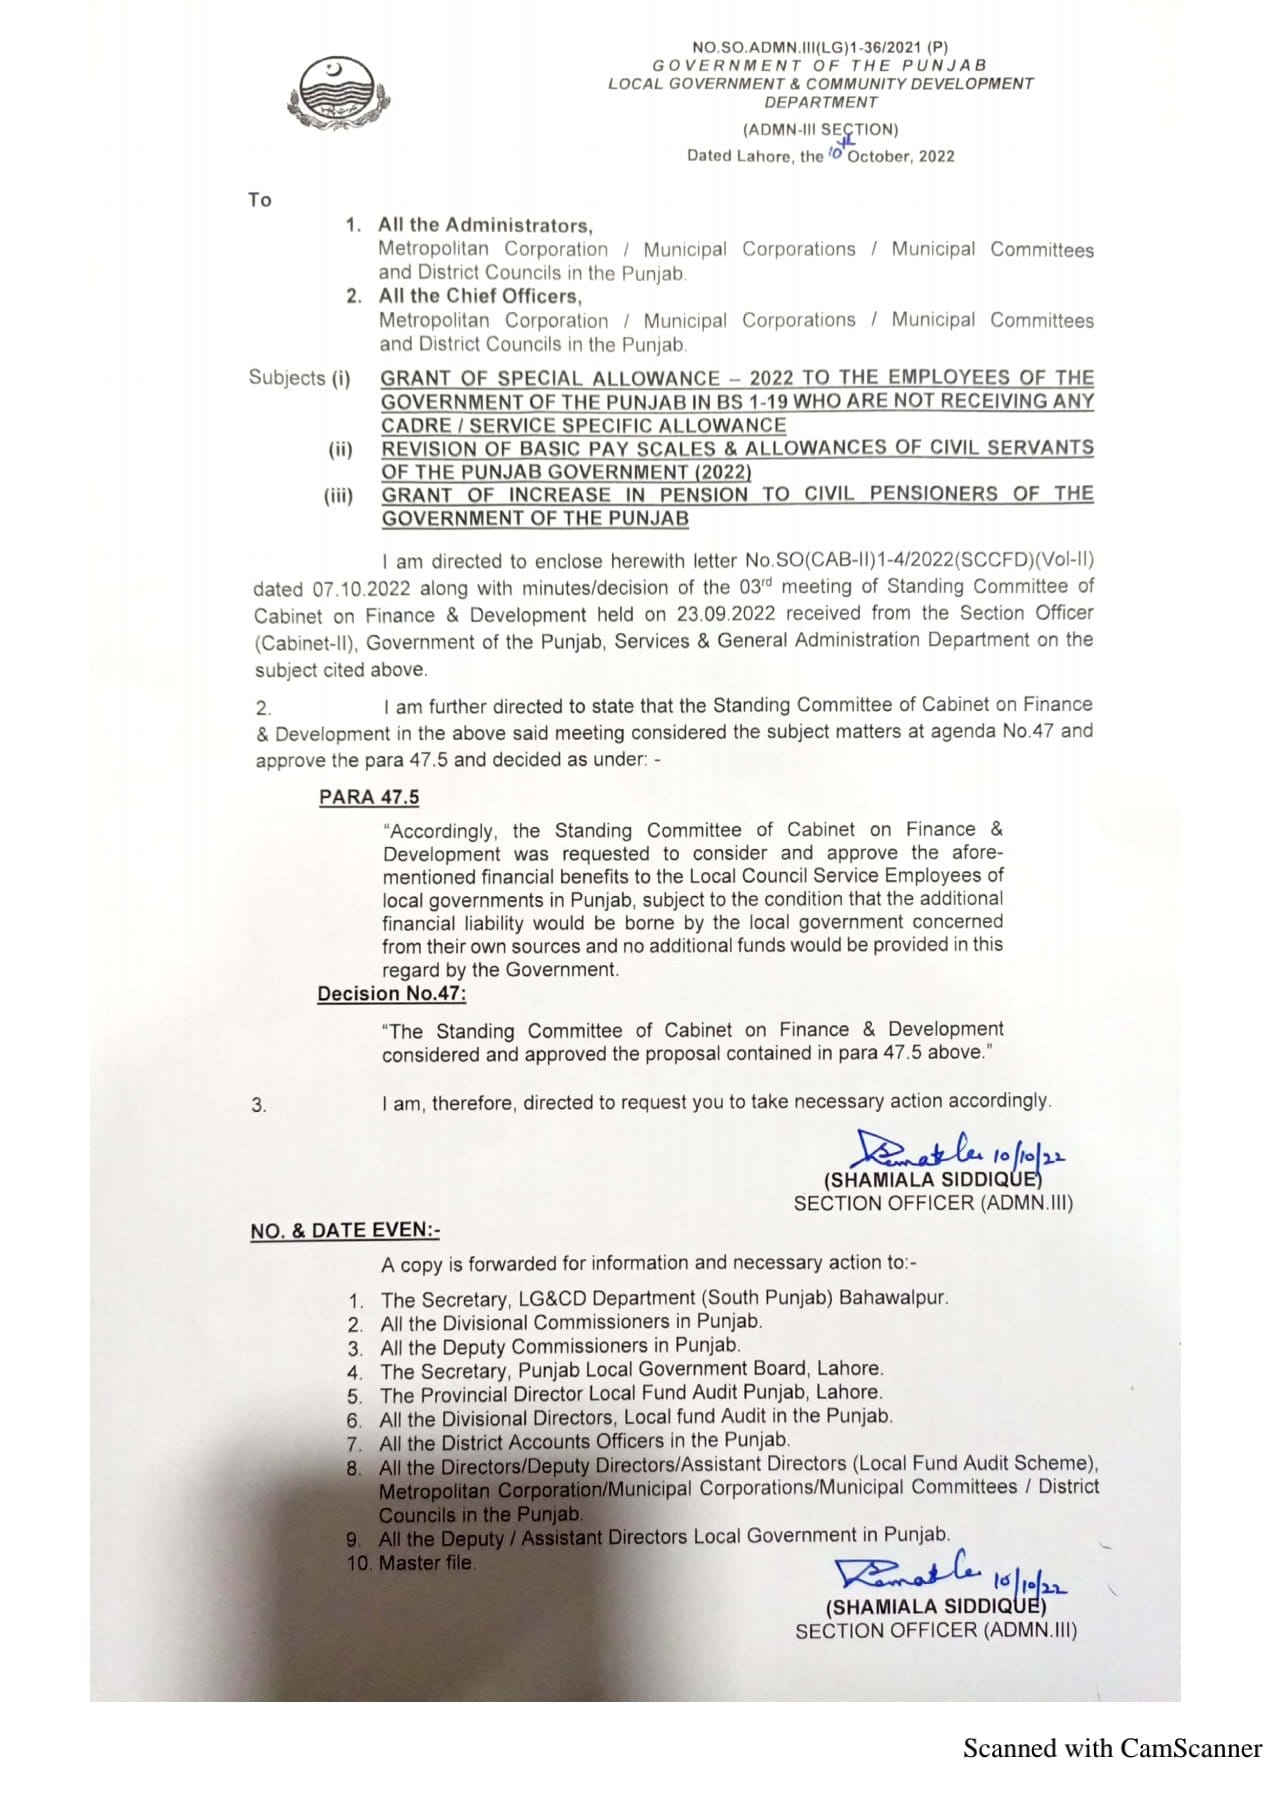 Notification of Special Allowance 2022, Revision Basic Pay Scales and Pension Local Government Punjab